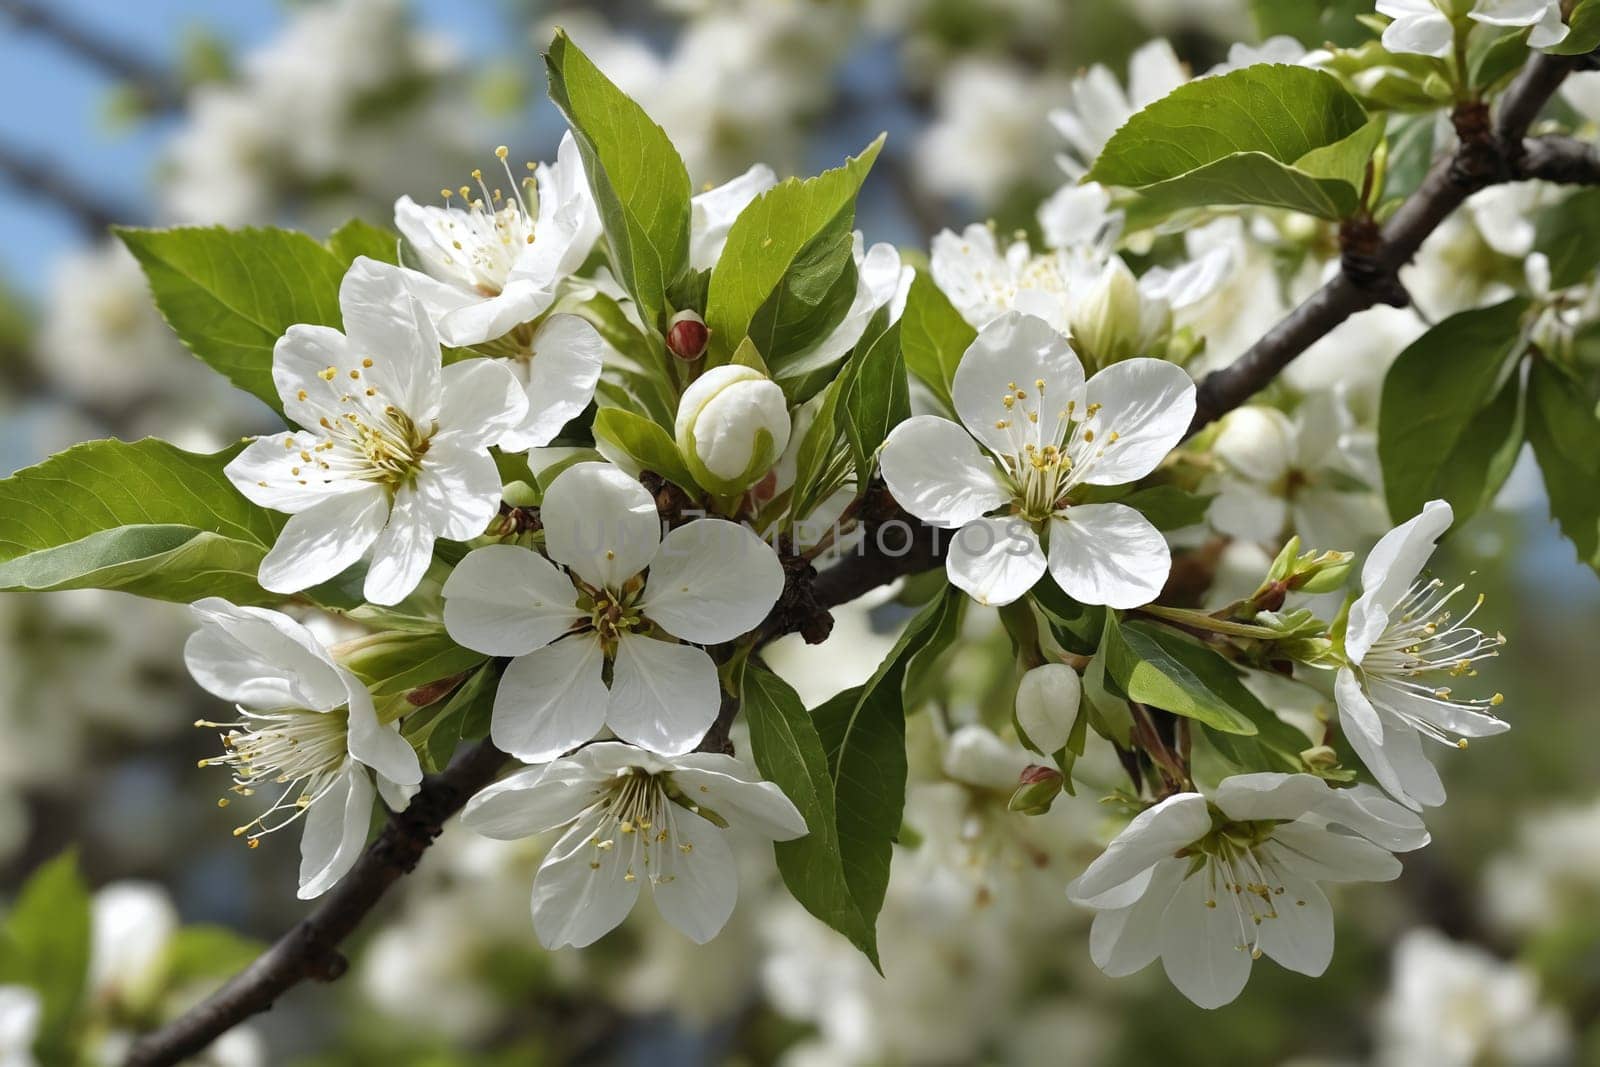 The charm of spring in every petal of blossoming apple.